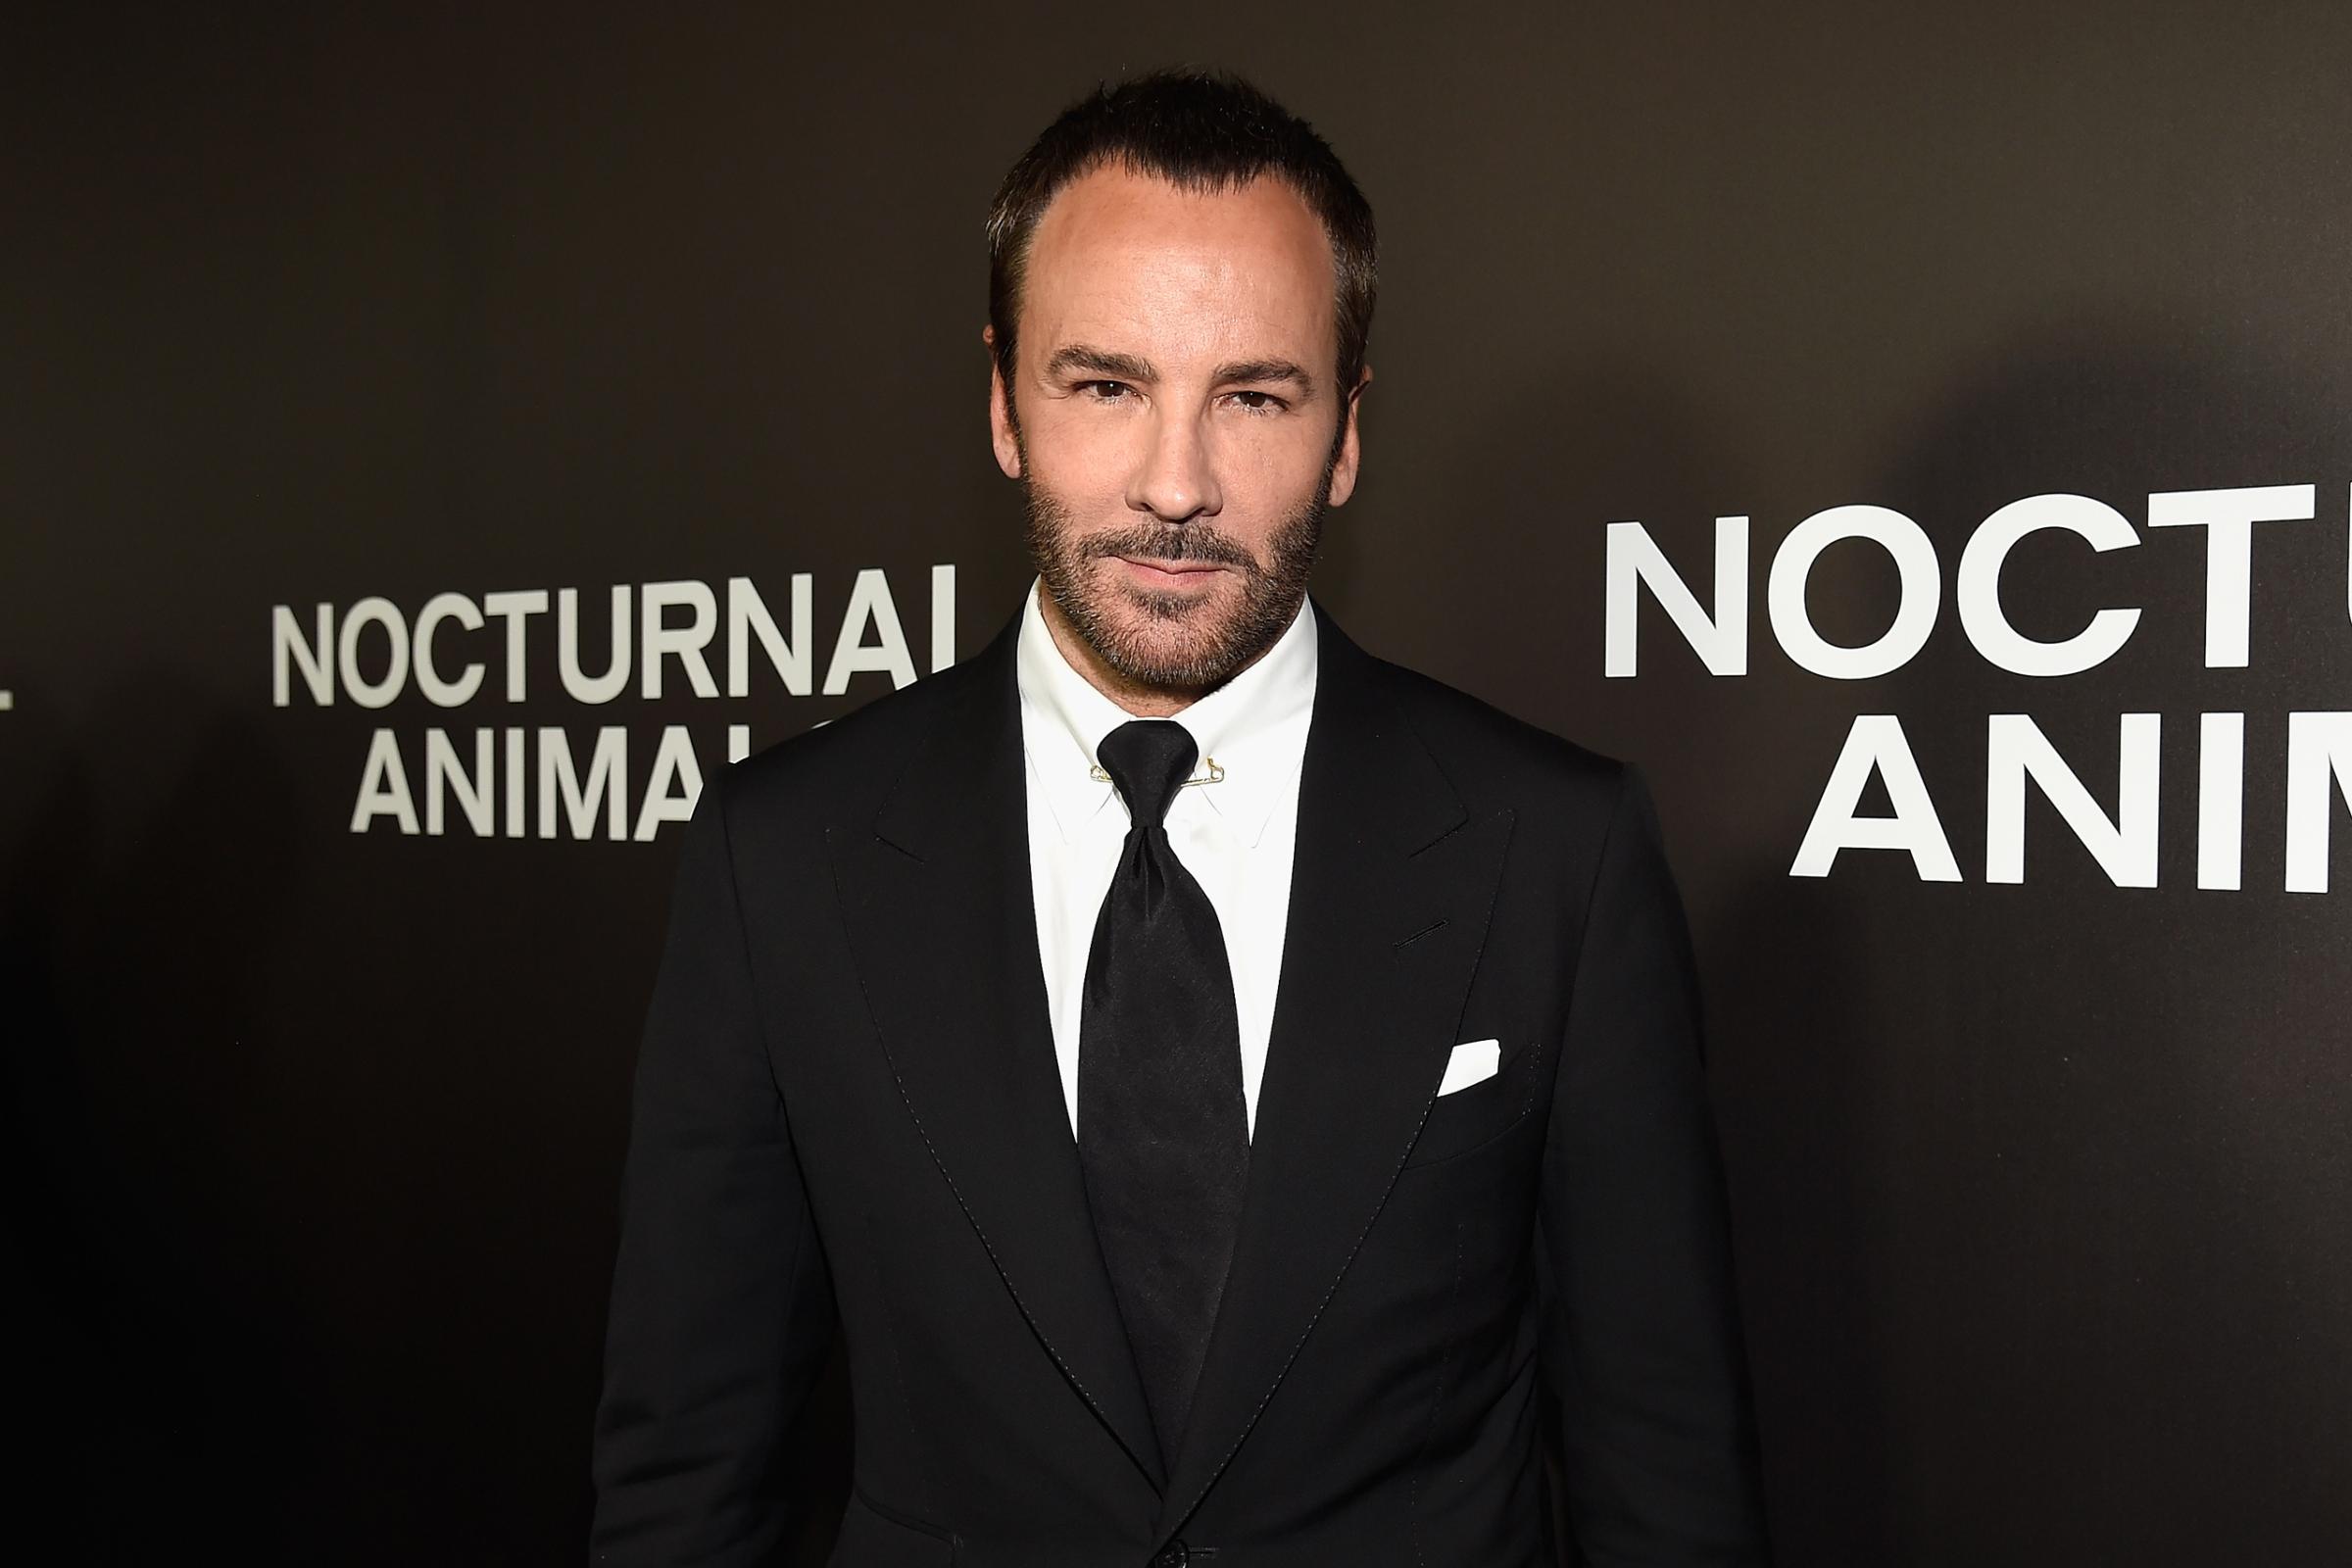 New York Premiere of Tom Ford's "Nocturnal Animals"